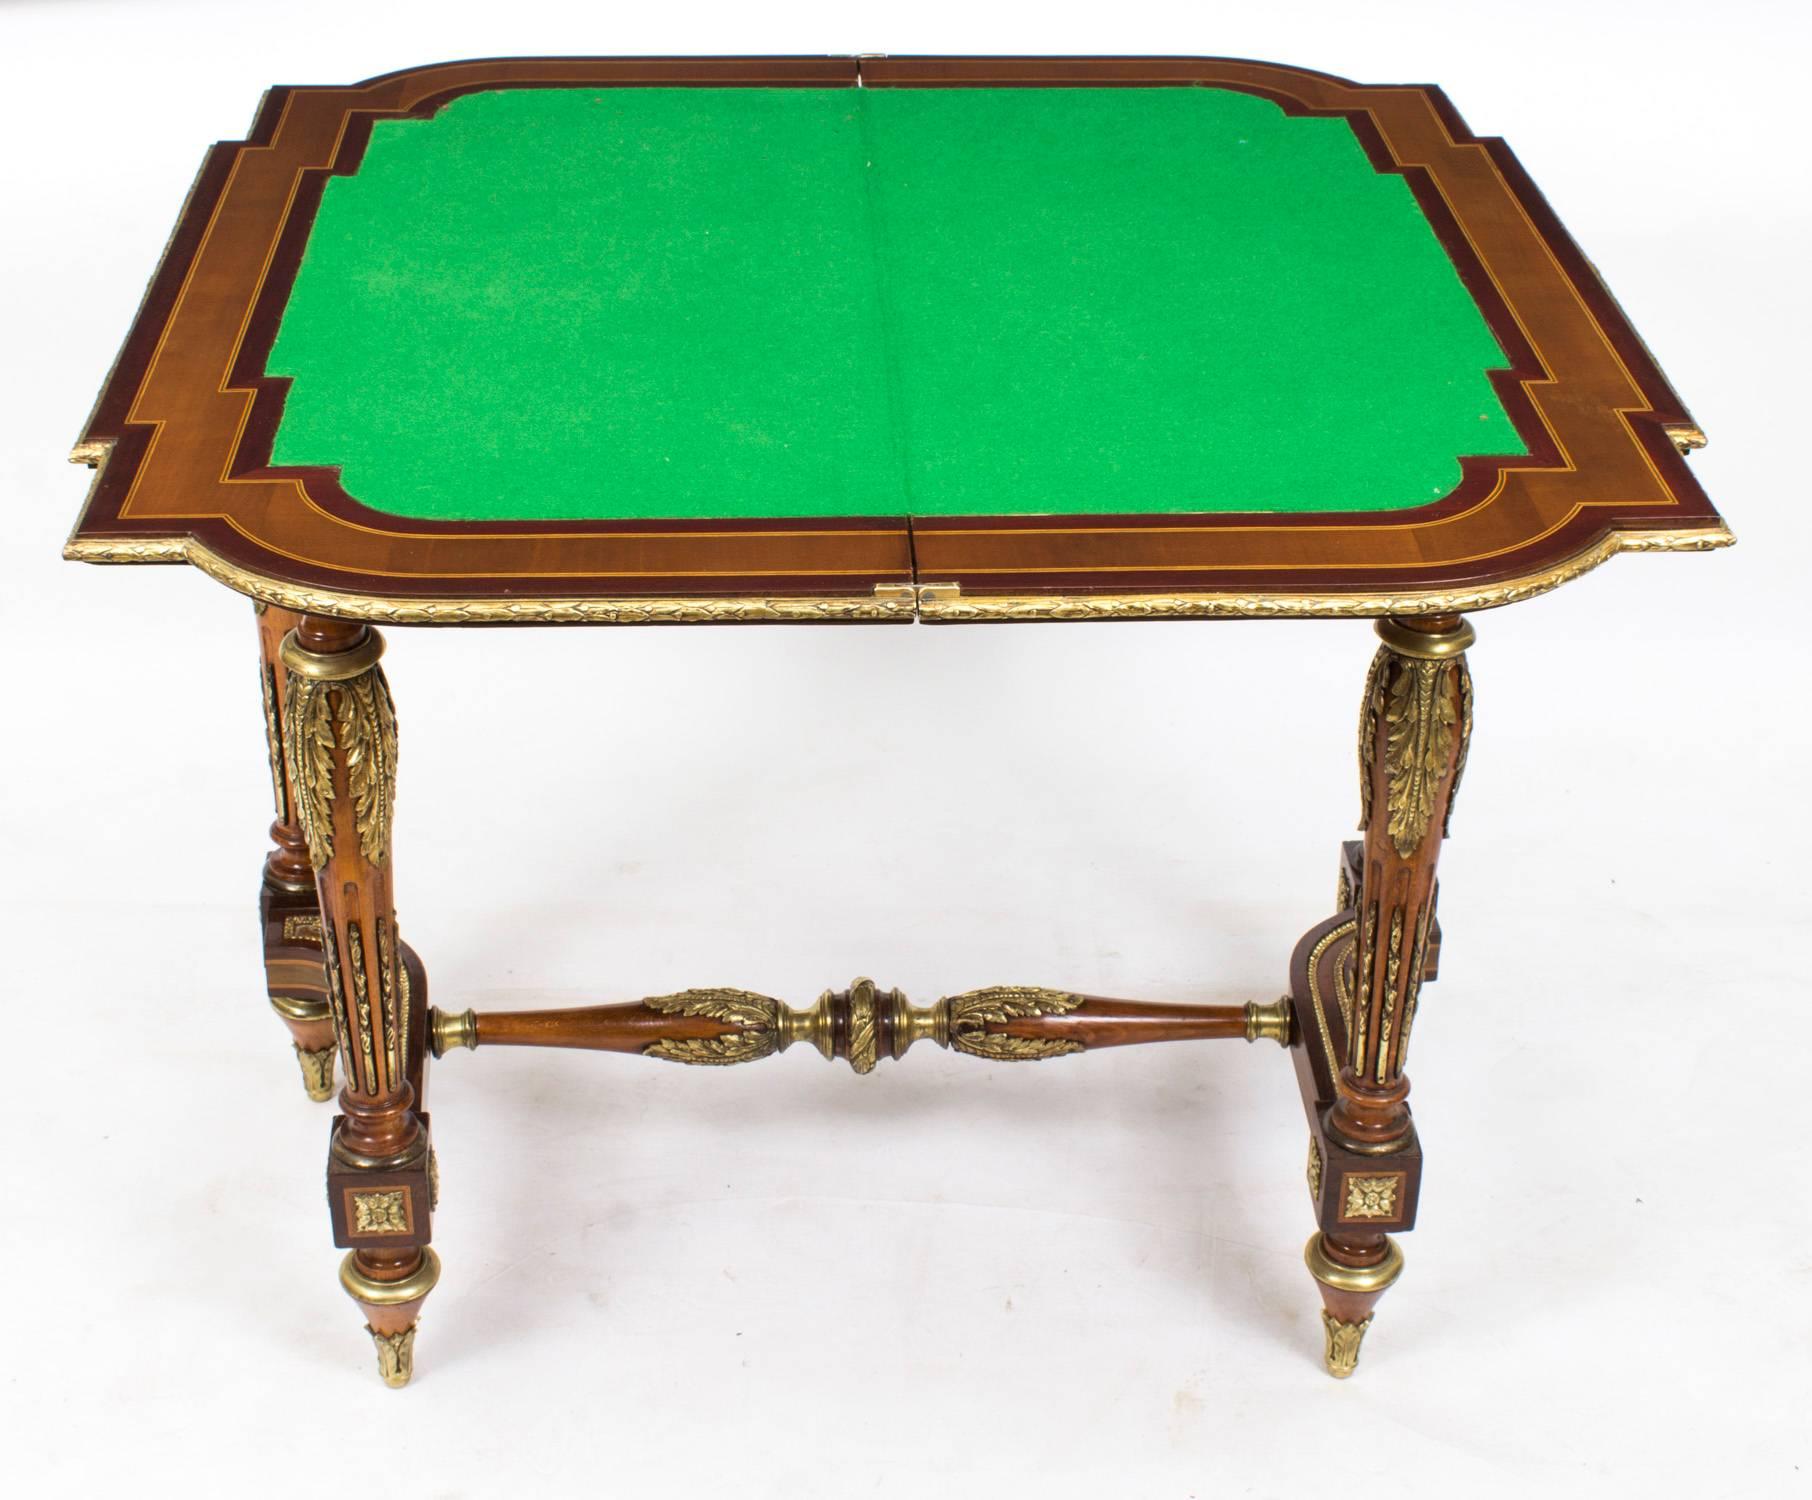 This is a magnificent antique French mahogany, kingwood, satinwood, marquetry and ormolu-mounted card table, circa 1870 in date.

The craftsmanship and finish are second to none, and the table features exquisite inlaid marquetry of musical